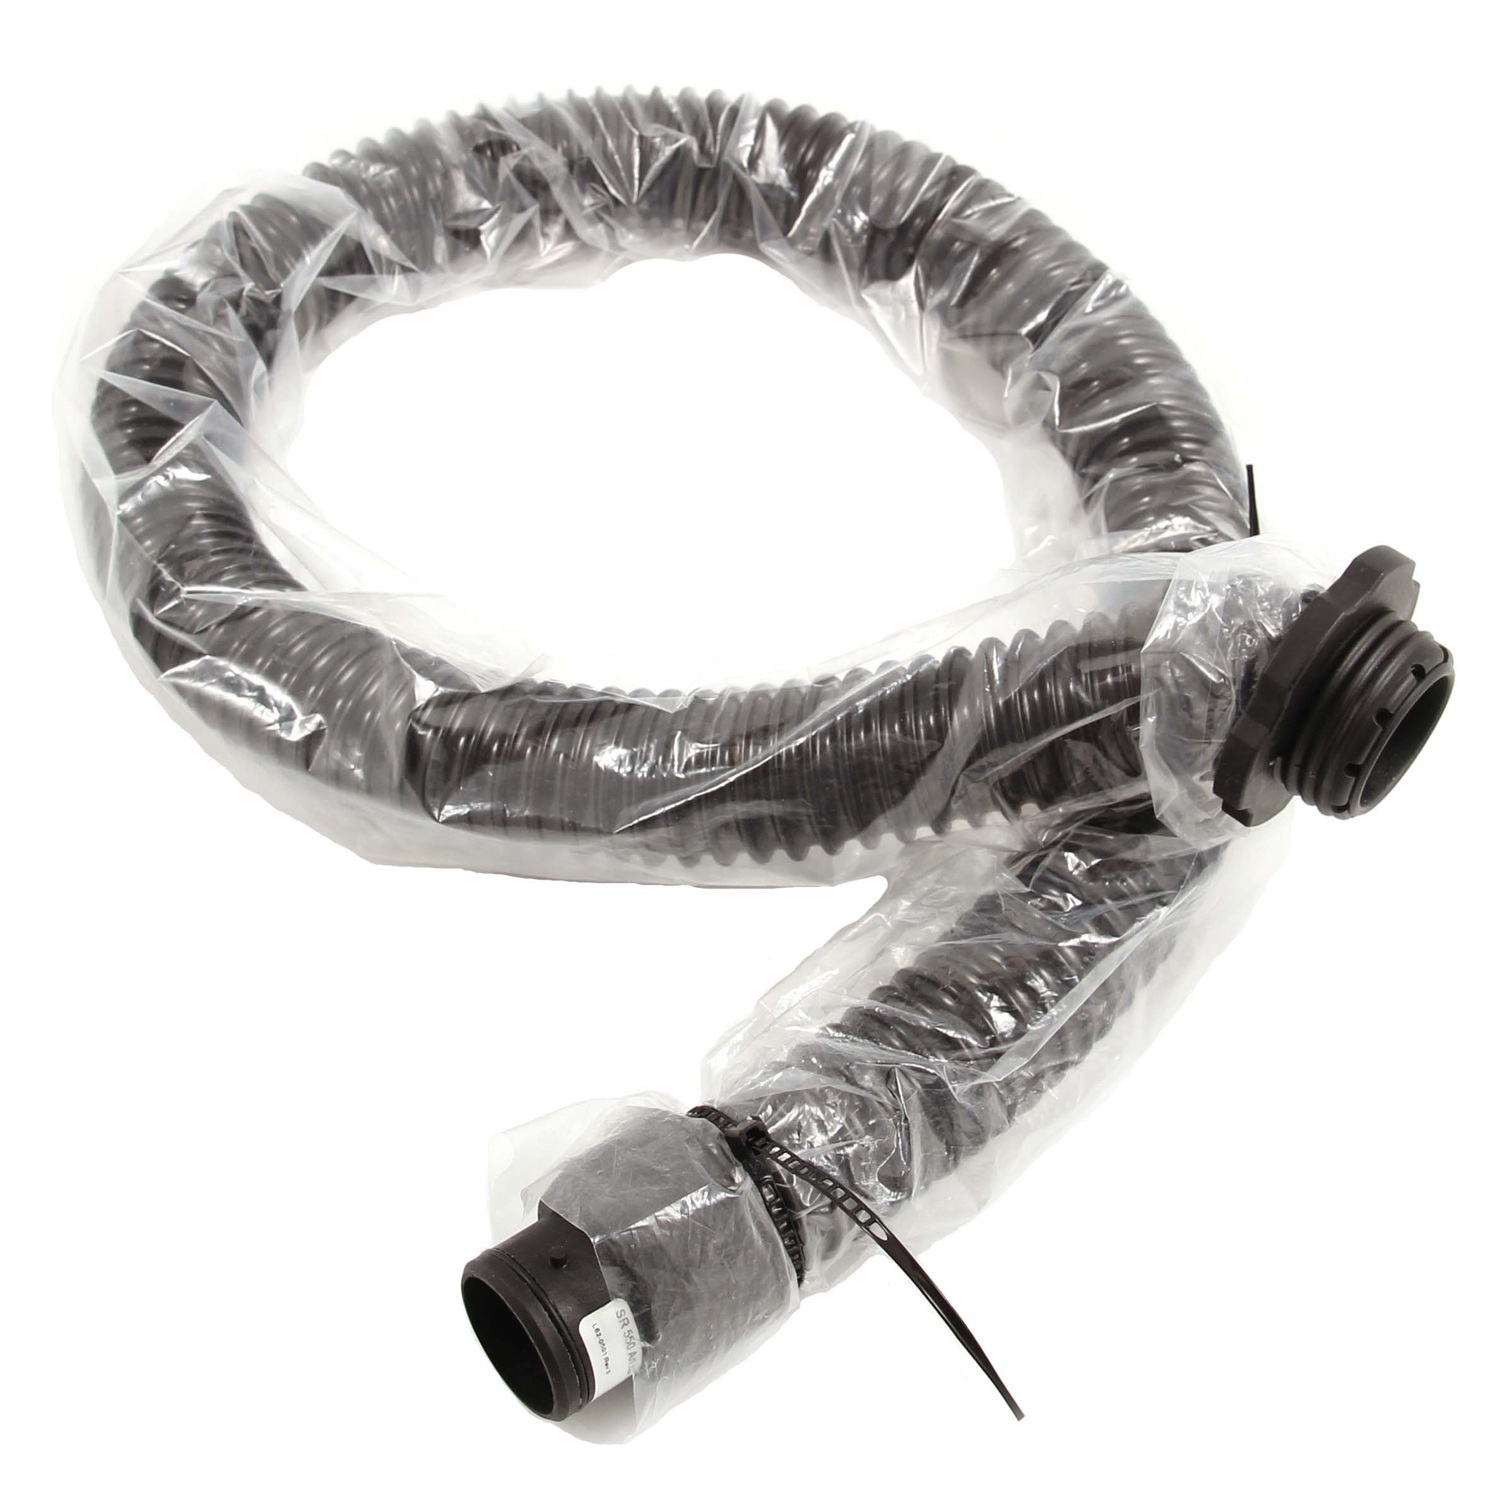 Hose protection